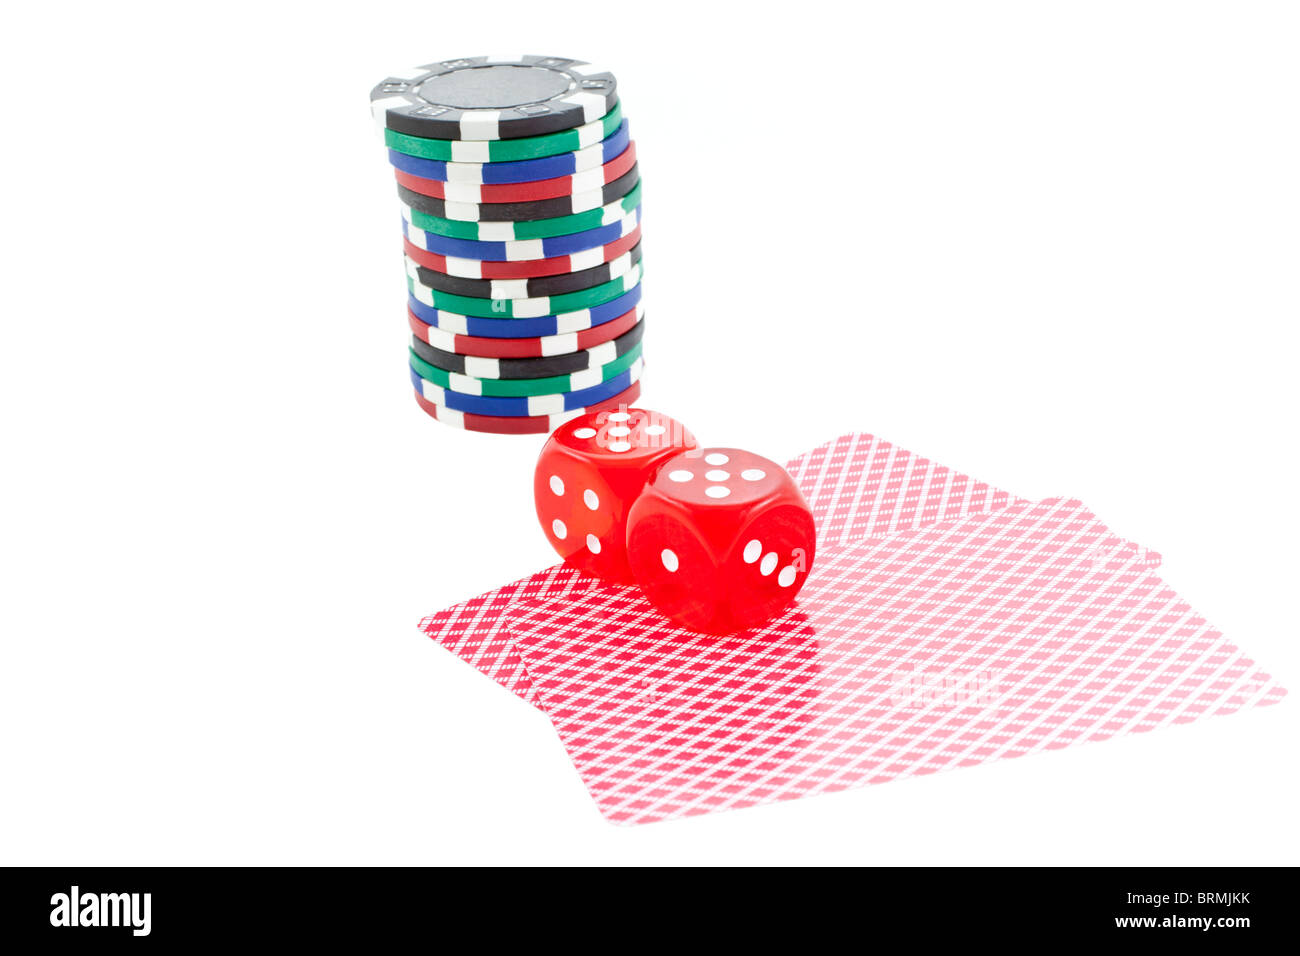 poker chips, cards and red dice cubes isolated on white background Stock Photo